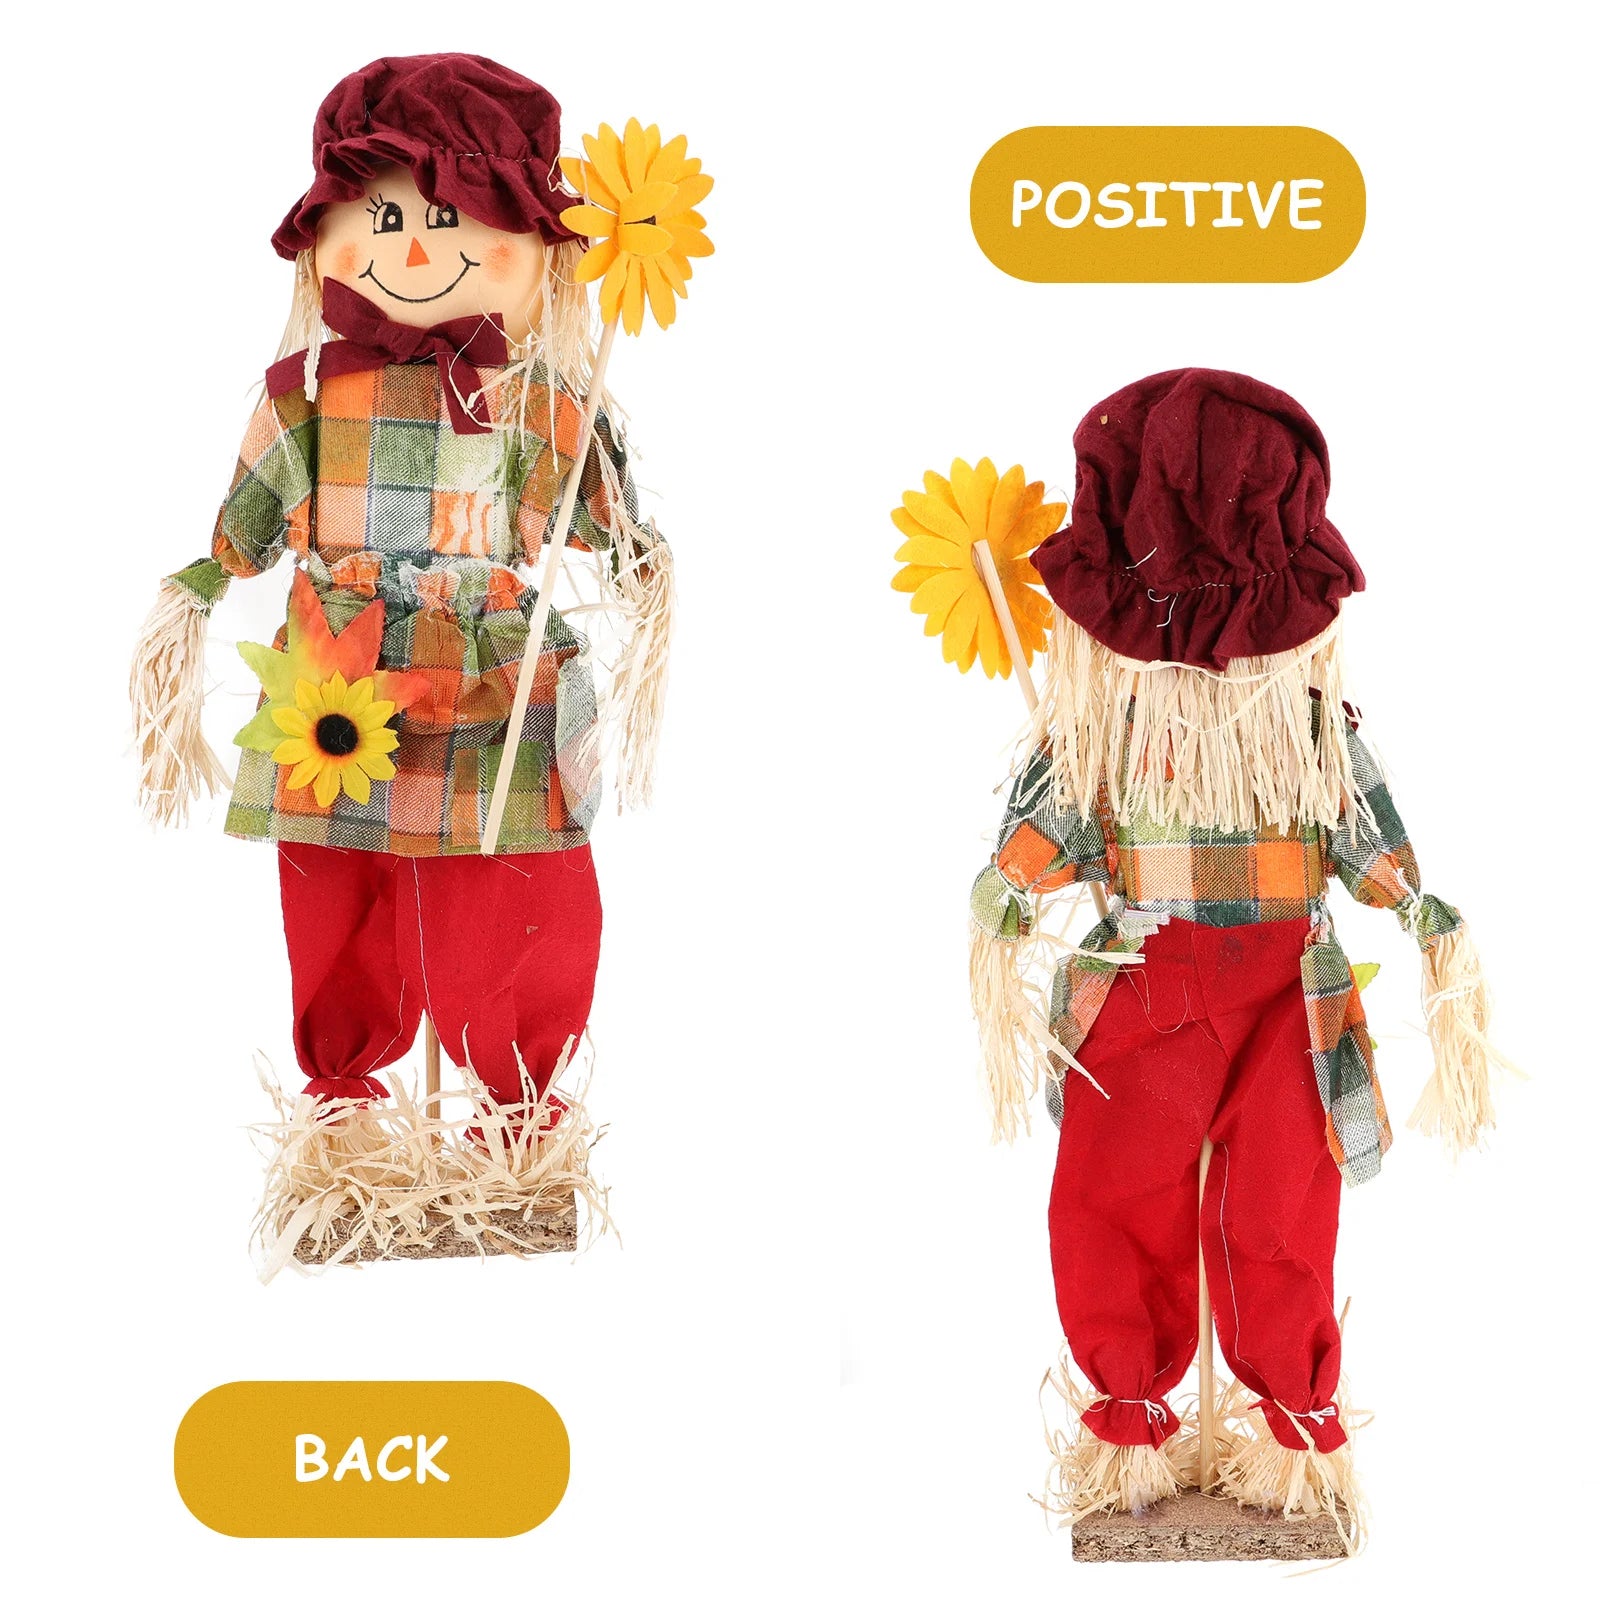 2pcs Halloween Scarecrow Ornaments Adorable Scarecrow Decors for Garden Party Decoration Yard Lawn Signs Scene Layout Ornament